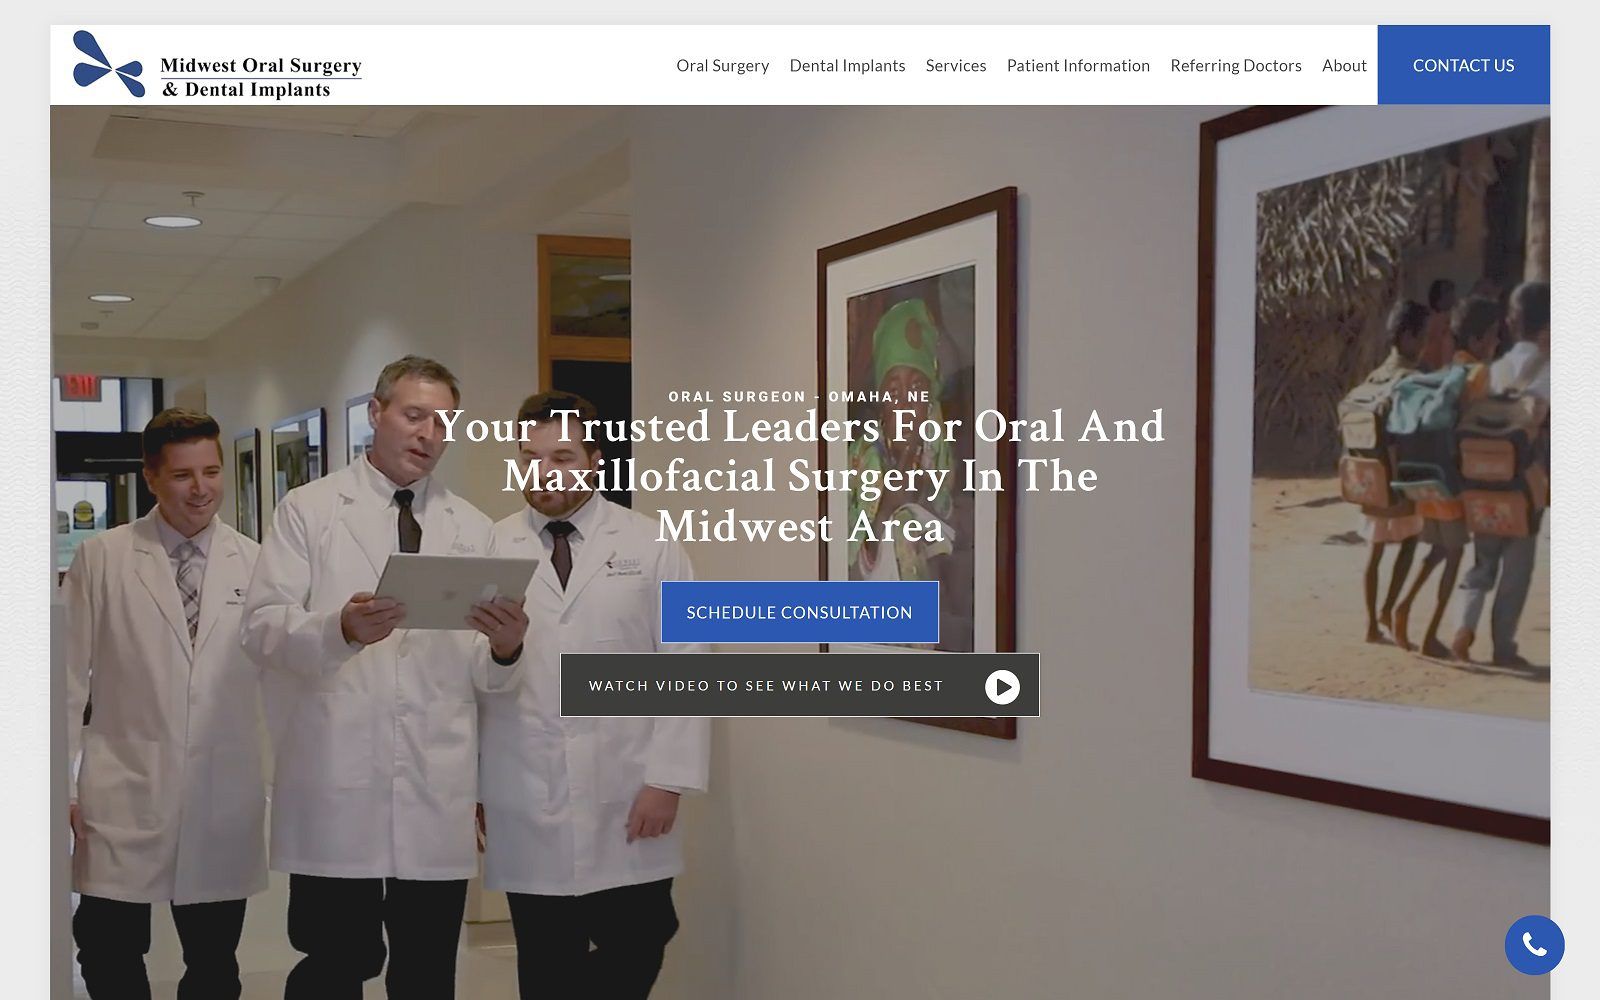 The screenshot of midwest oral surgery & dental implants website